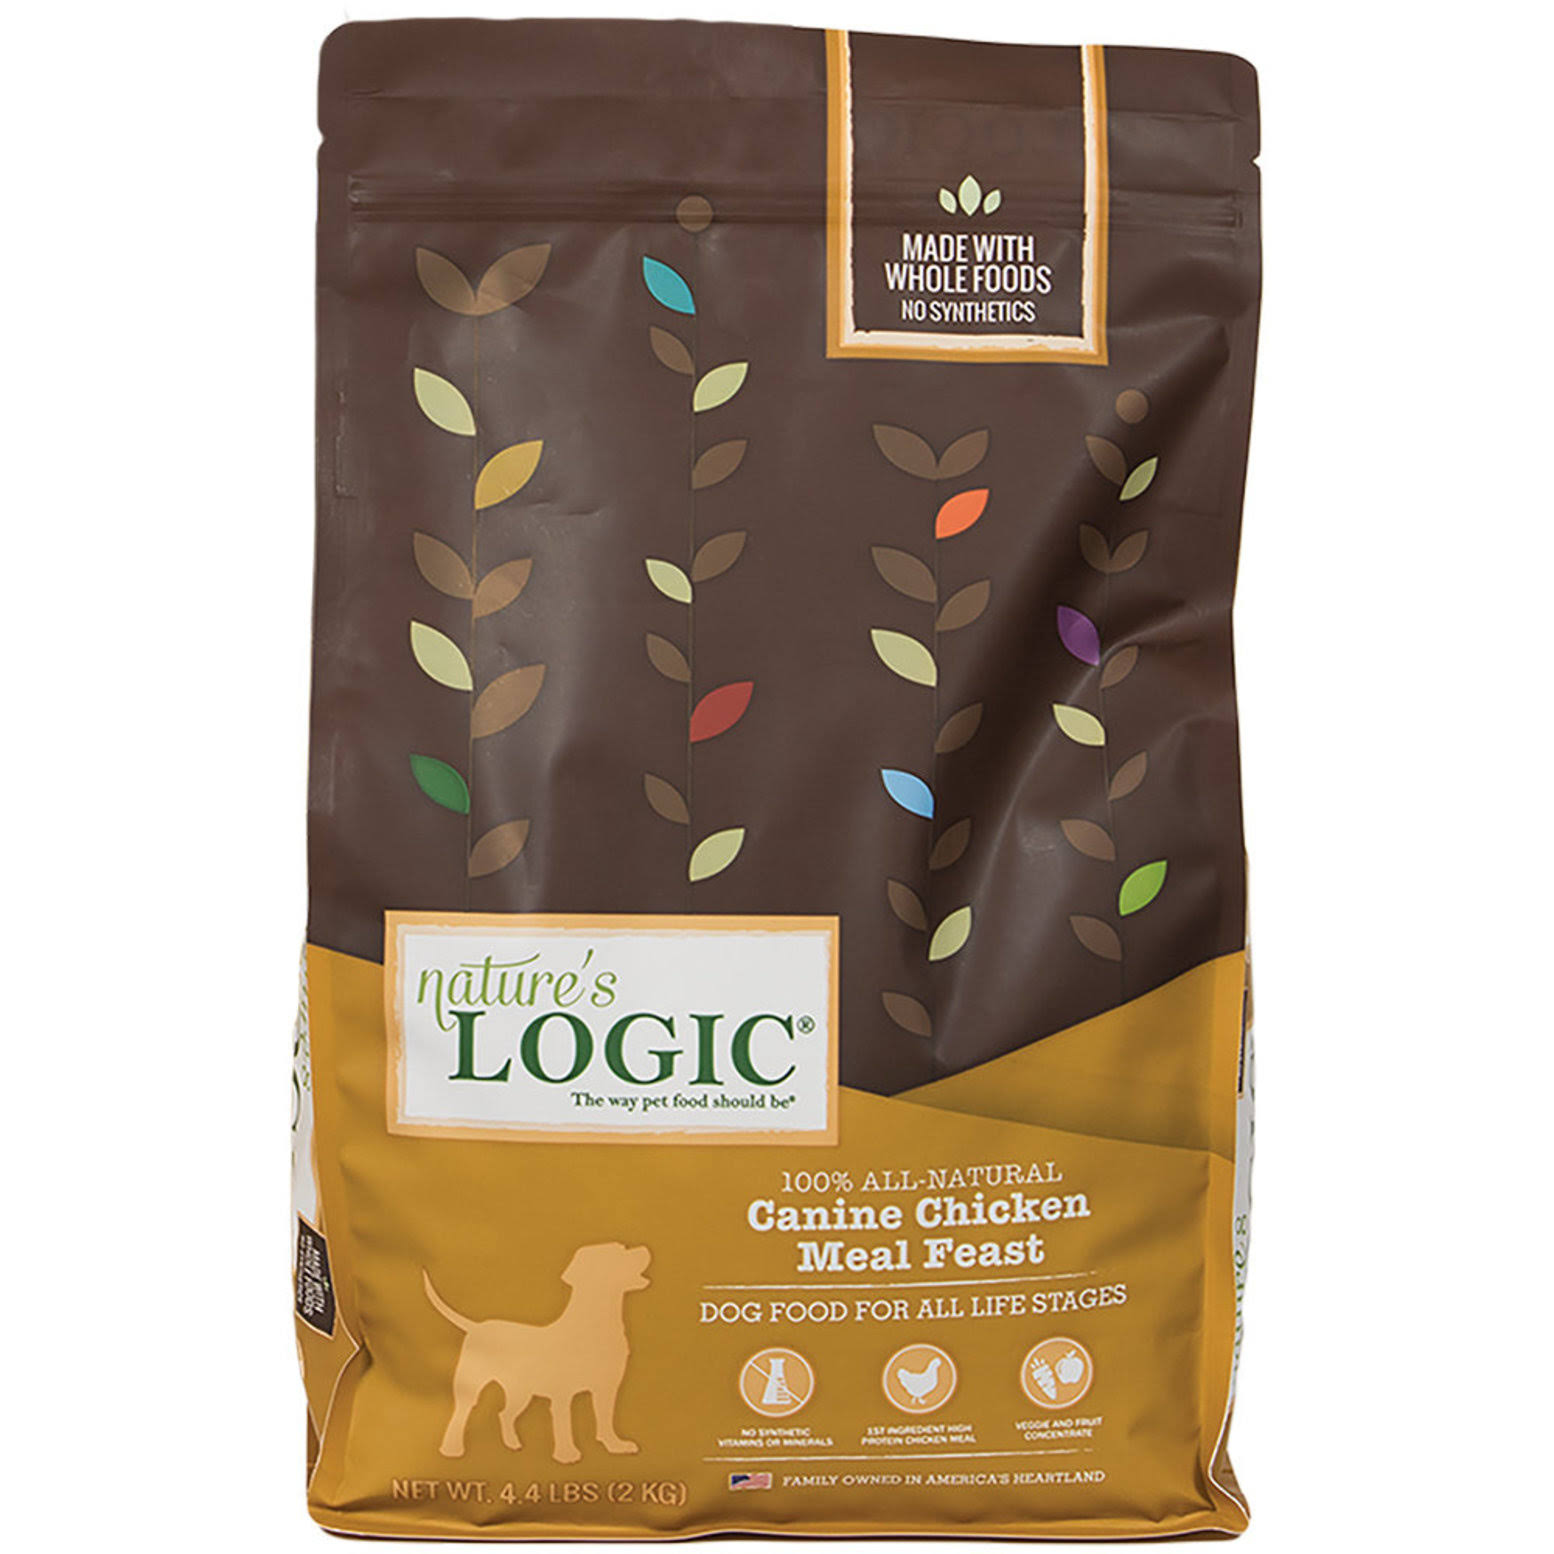 Nature's Logic Canine Chicken Meal Feast Dry Dog Food 26.4-lb